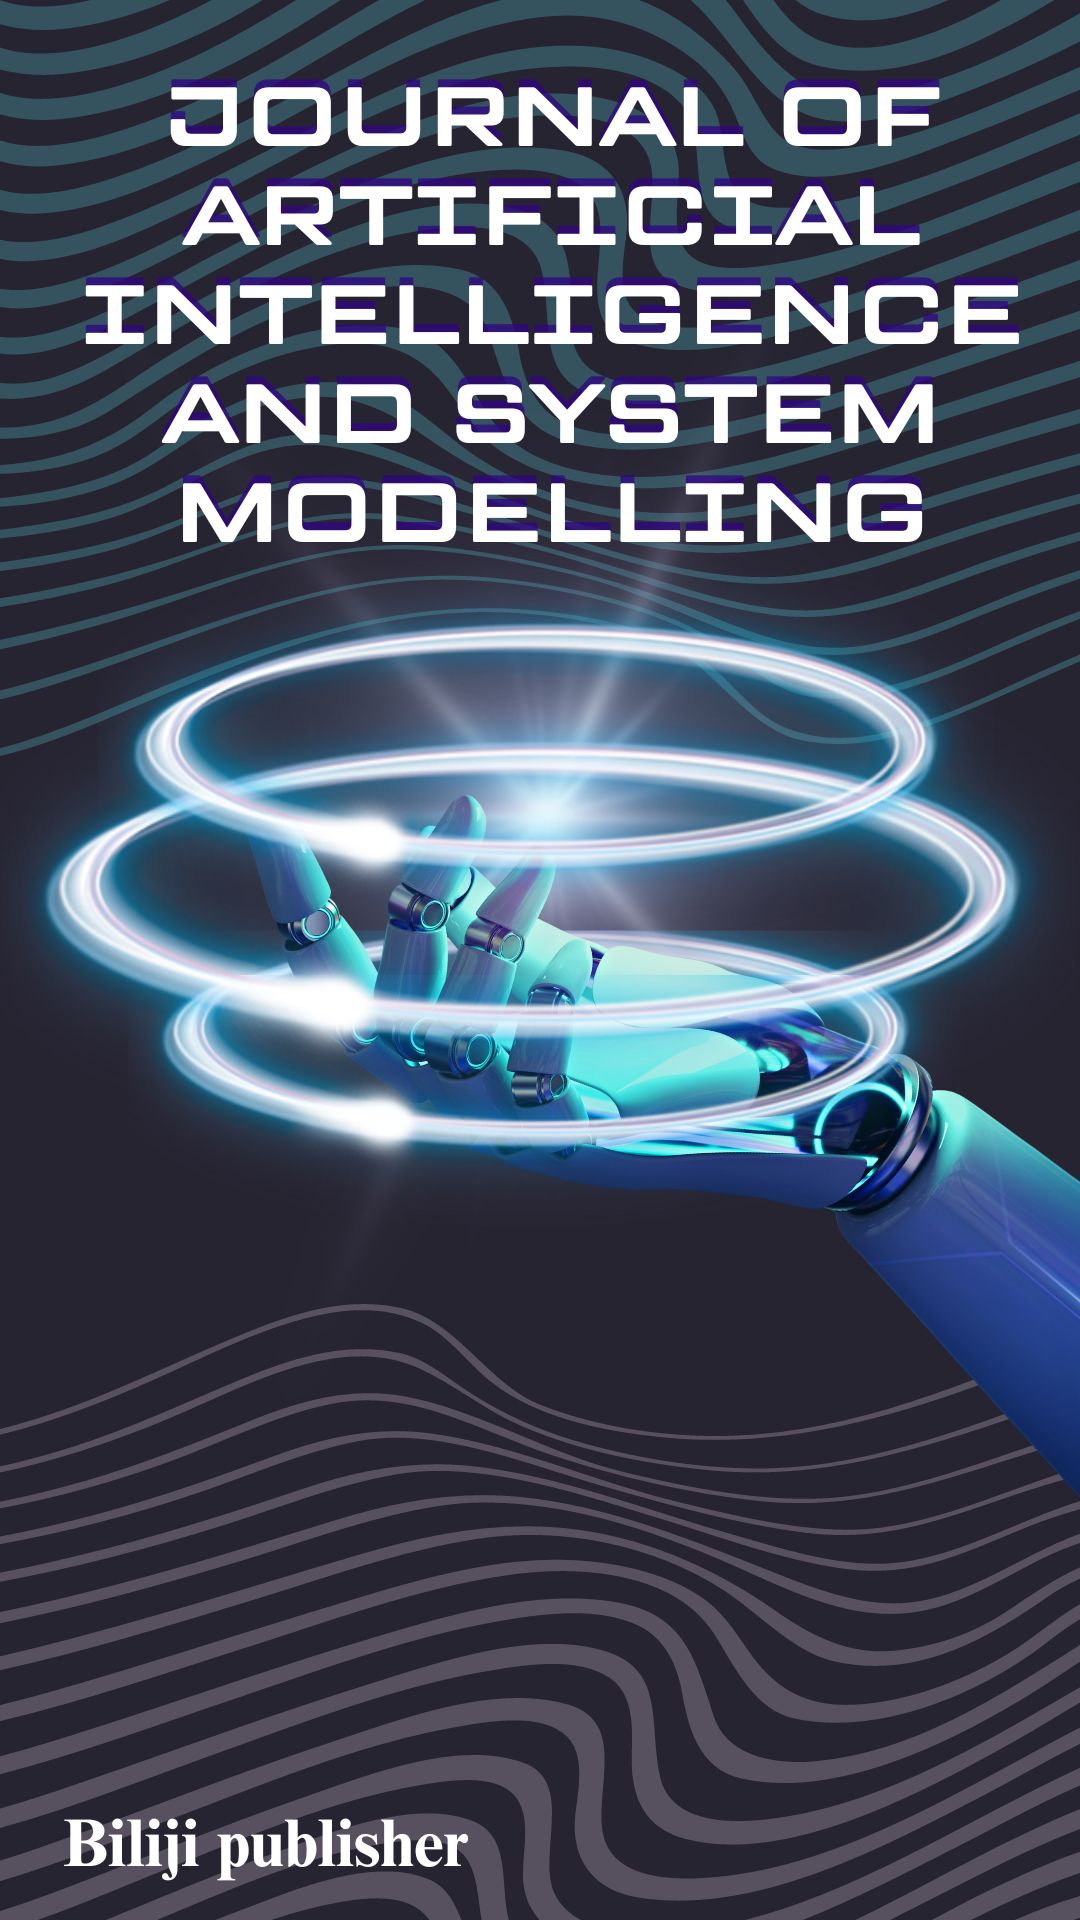 Journal of Artificial Intelligence and System Modelling